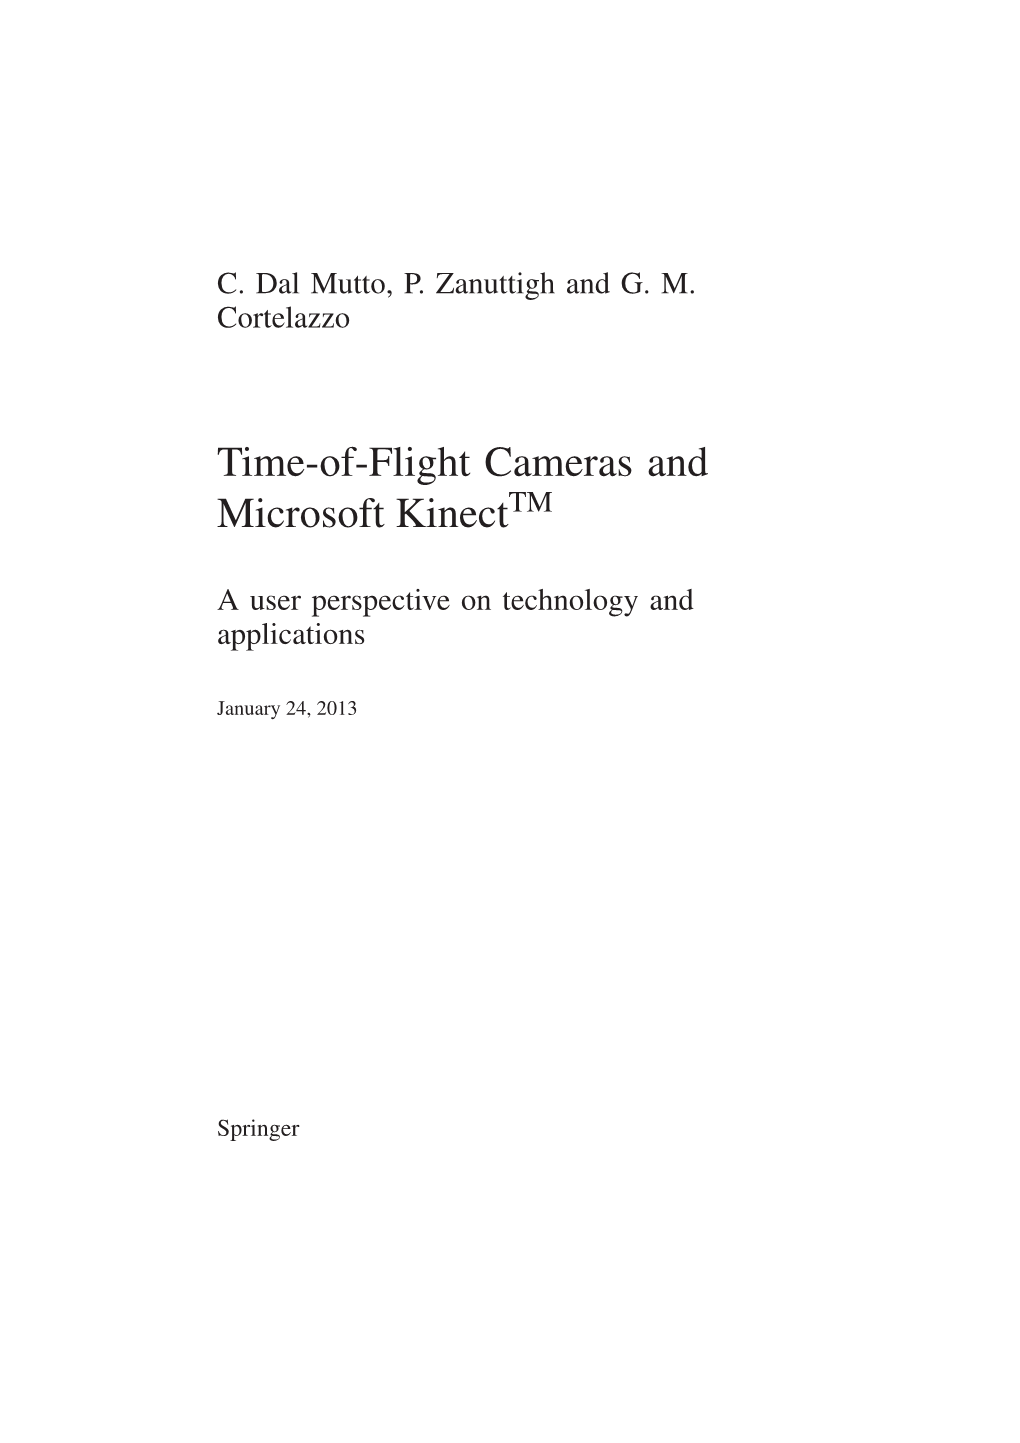 Time-Of-Flight Cameras and Microsoft Kinect TM